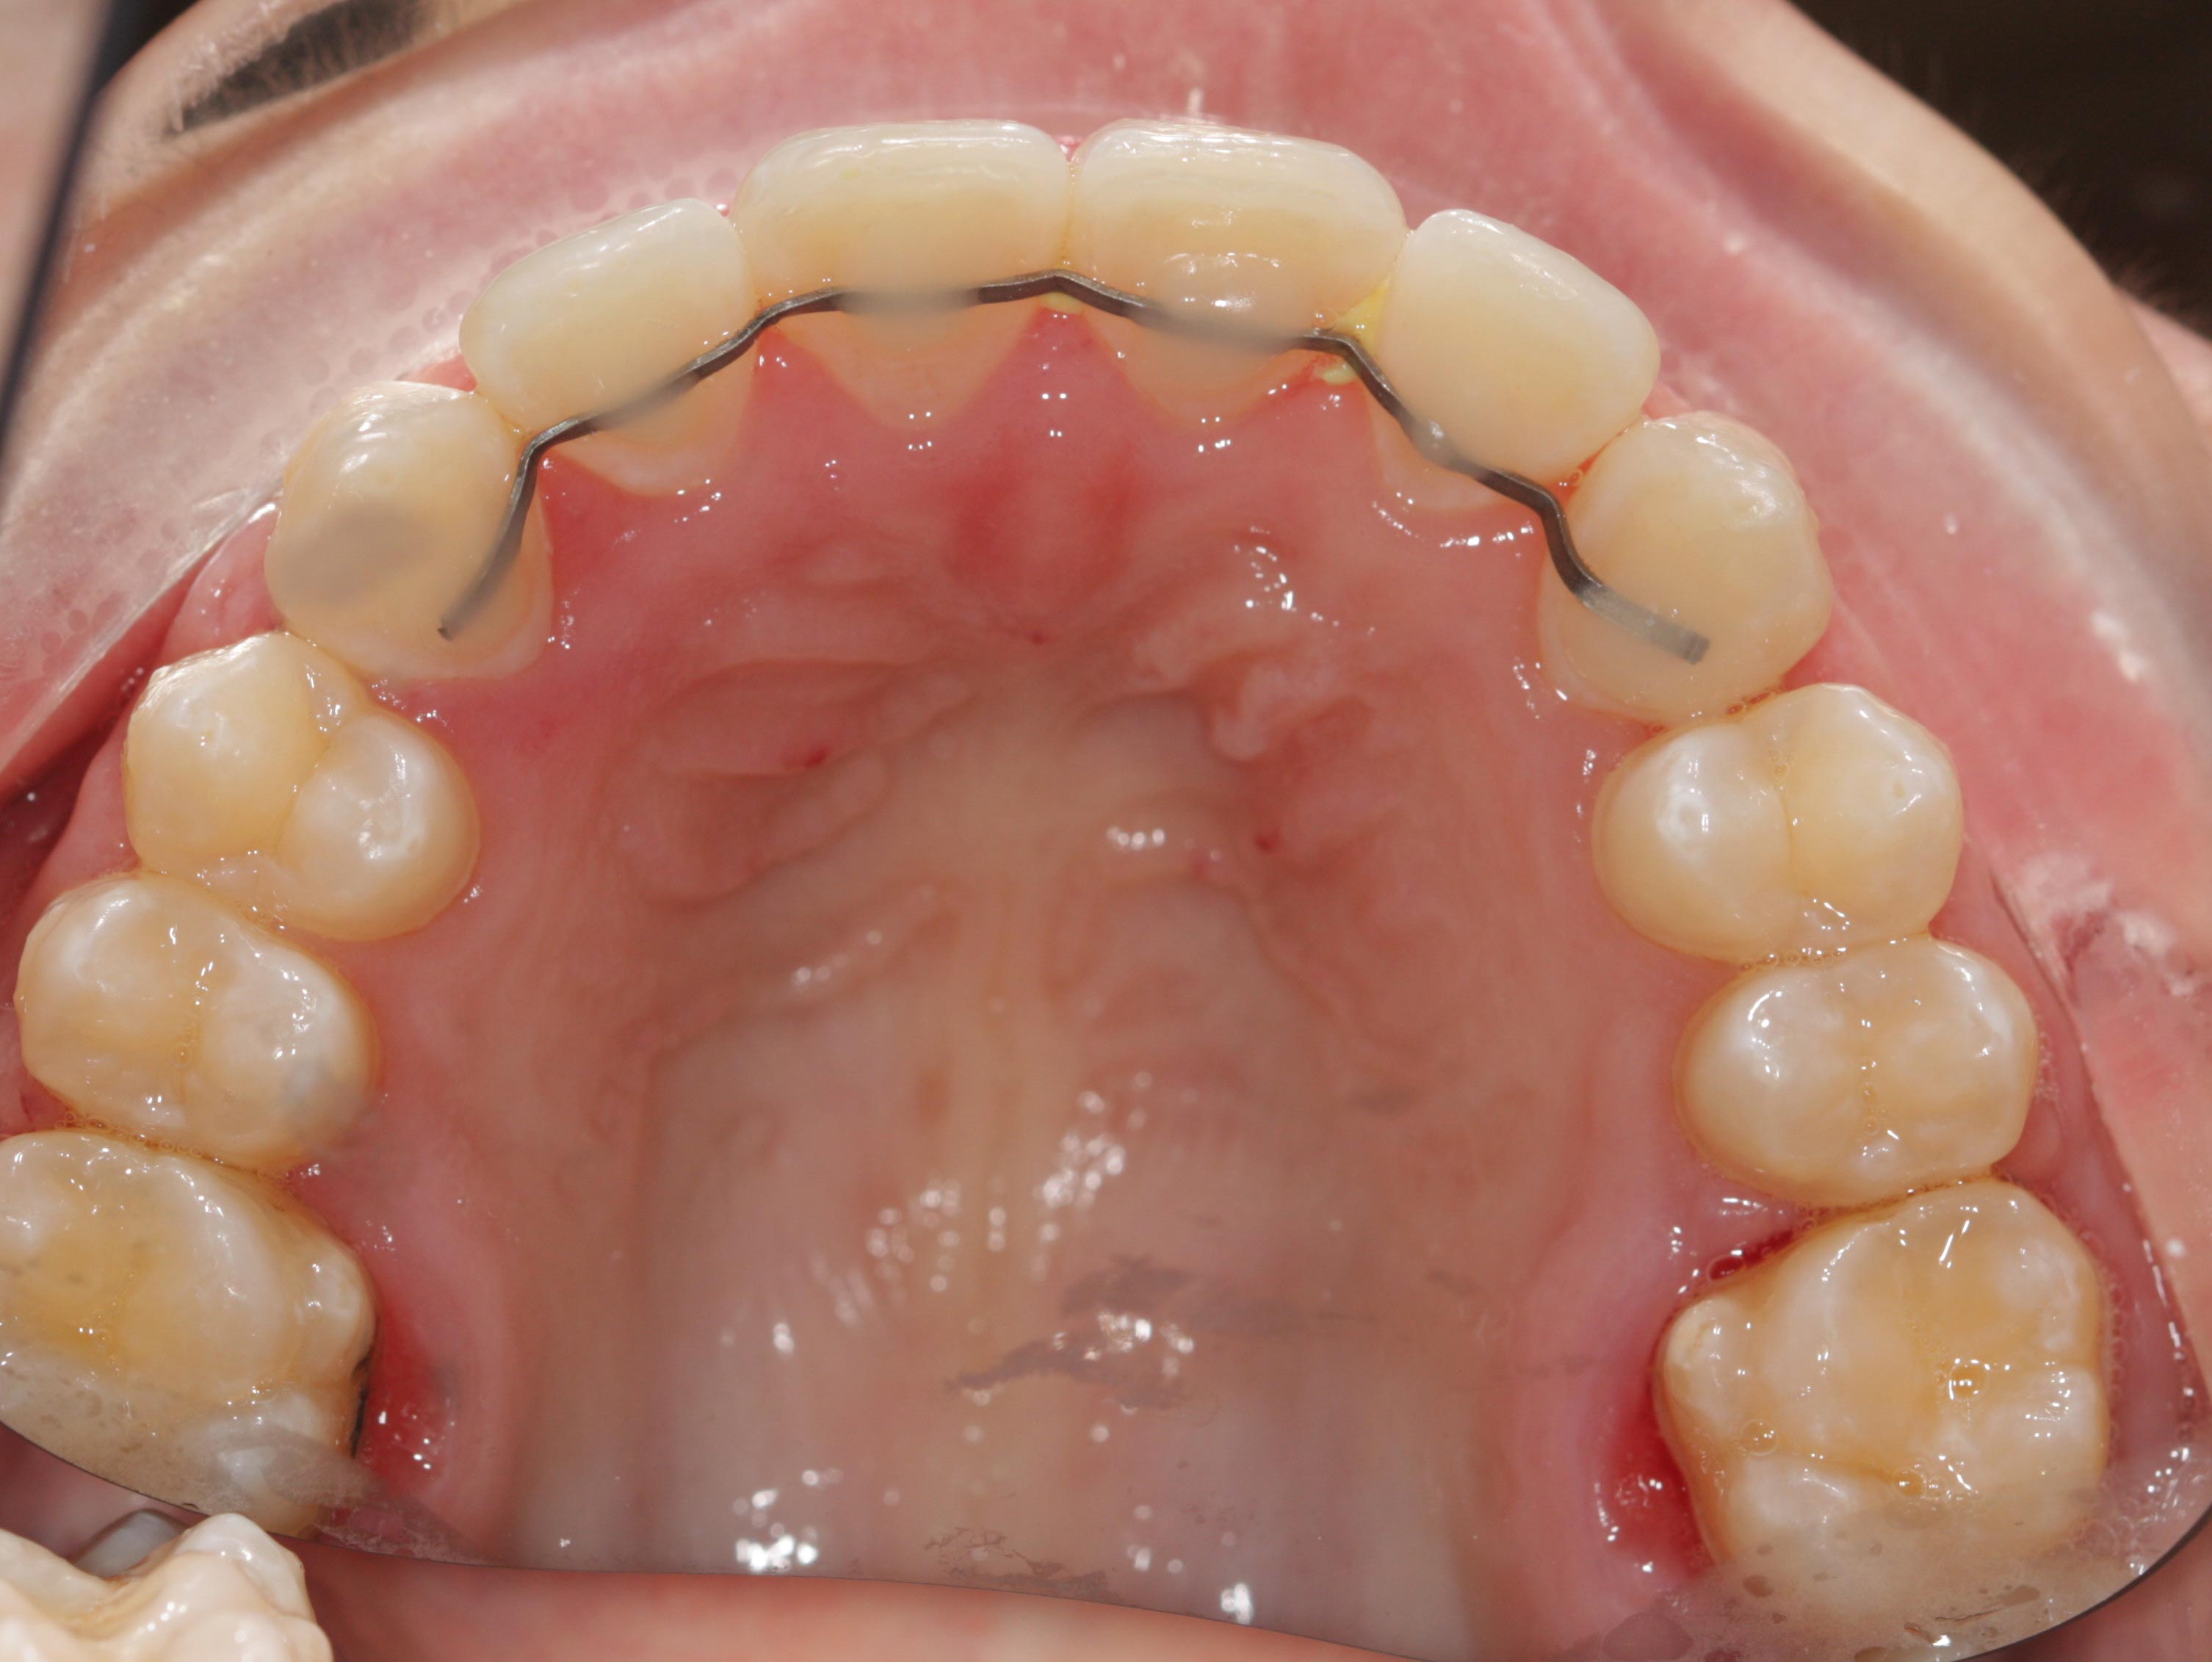 An after photo of teeth after orthodontic treatment. There is a permanent retainer on the teeth.